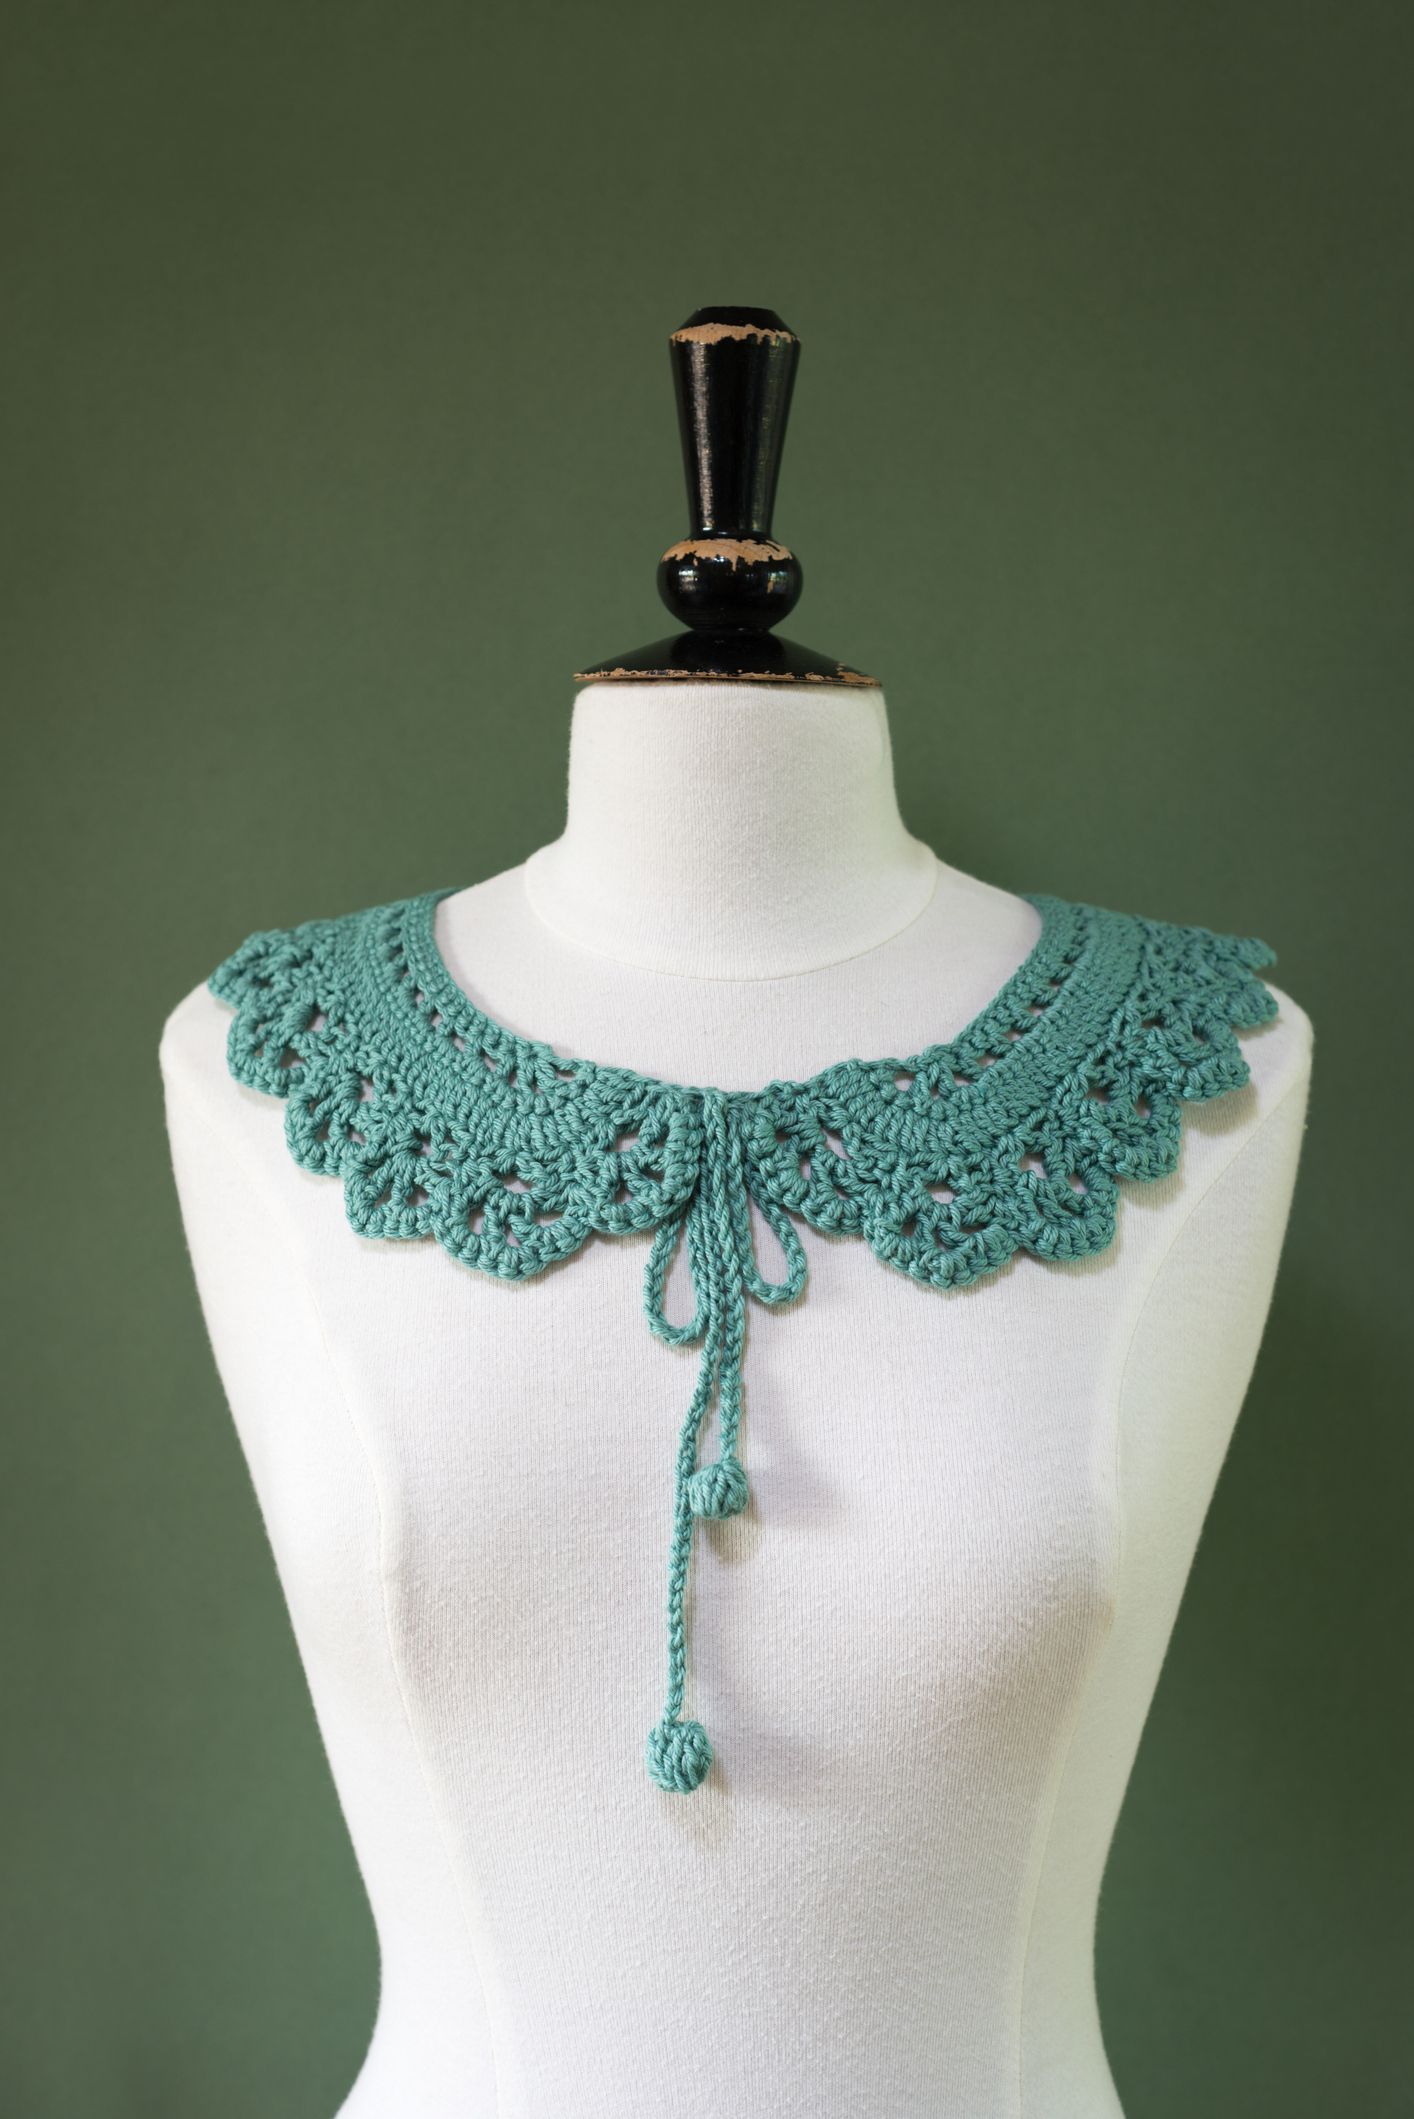 Crochet collar ideas for your next yarn project